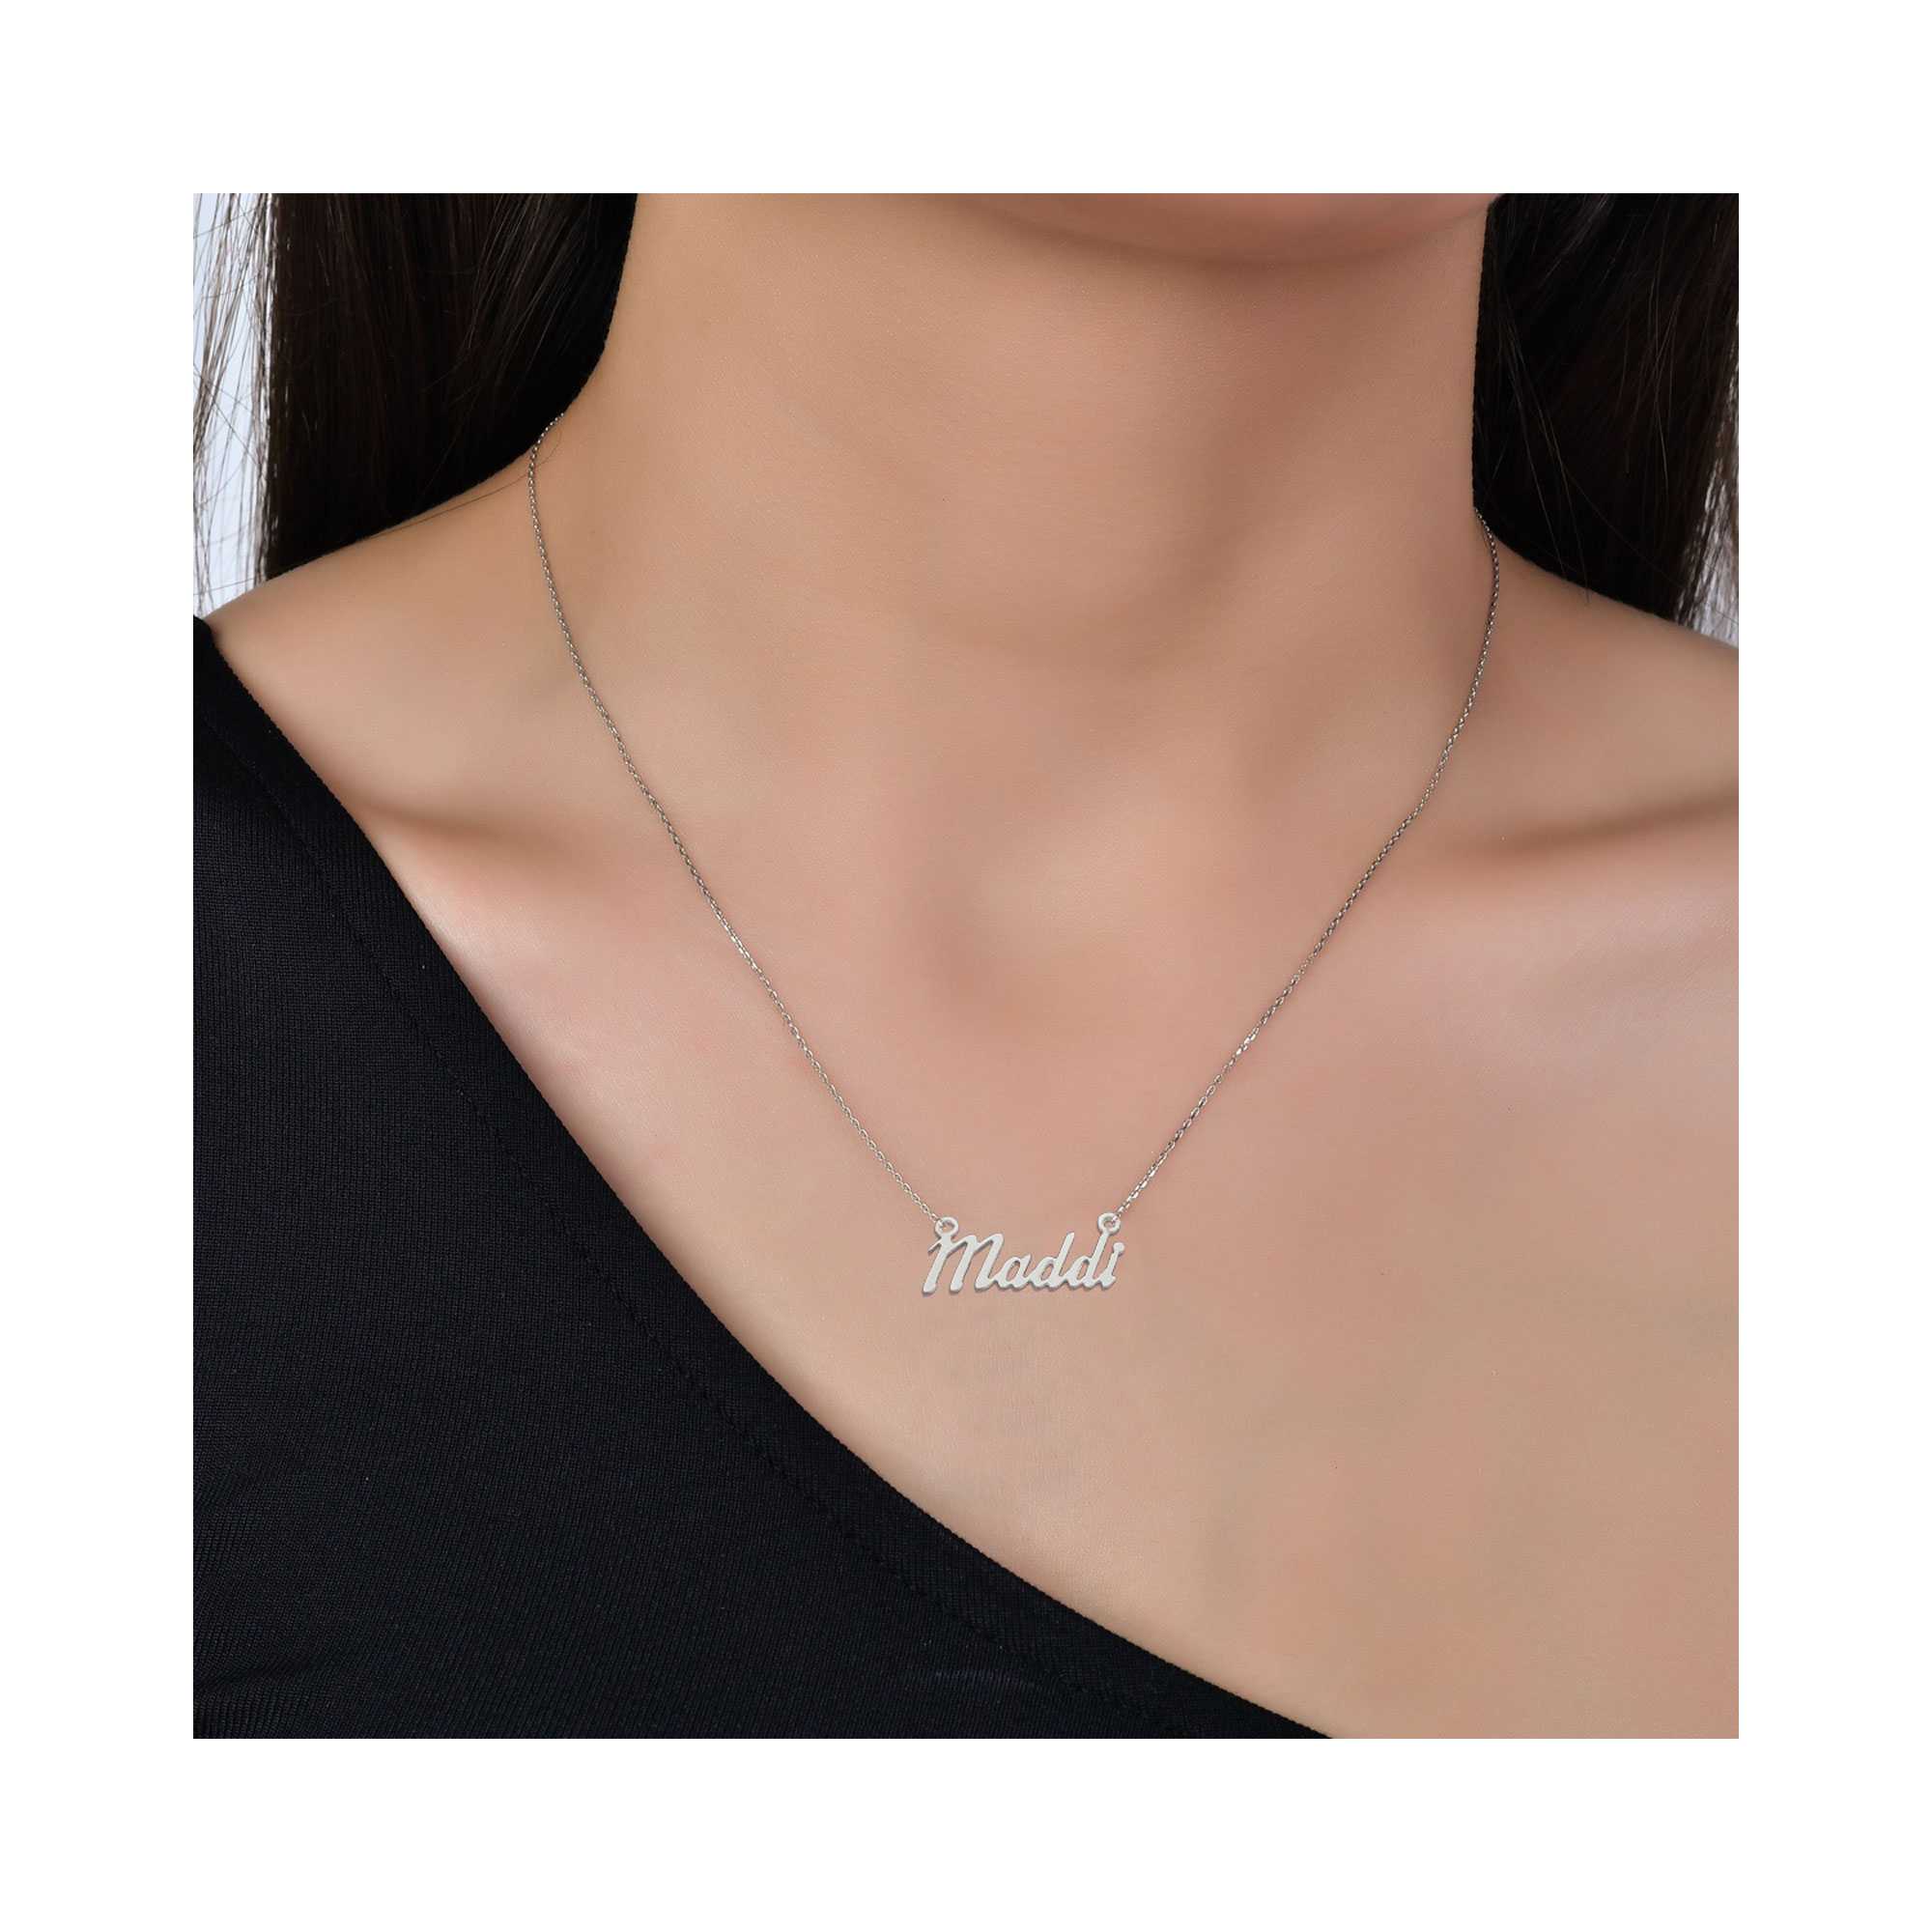 Personalized Name Necklace - | Mali's Canadian Jewelry Mali's 4 Metal Part: Gold Vermeil - Personalized Name Necklace - | Mali's